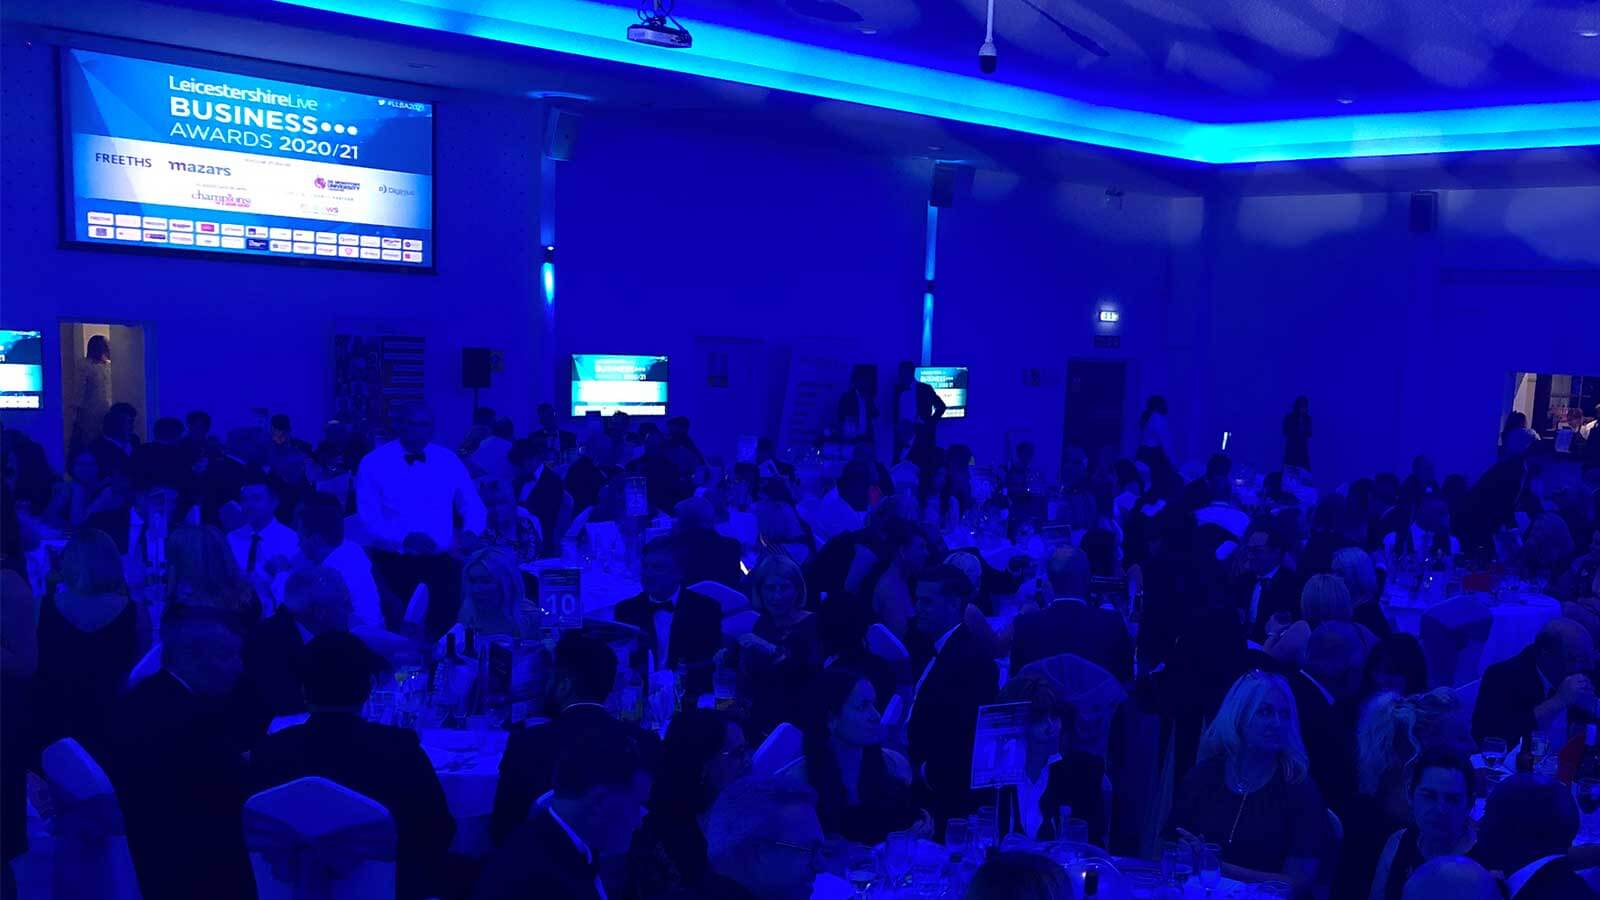 LeicestershireLive Business Awards 2021